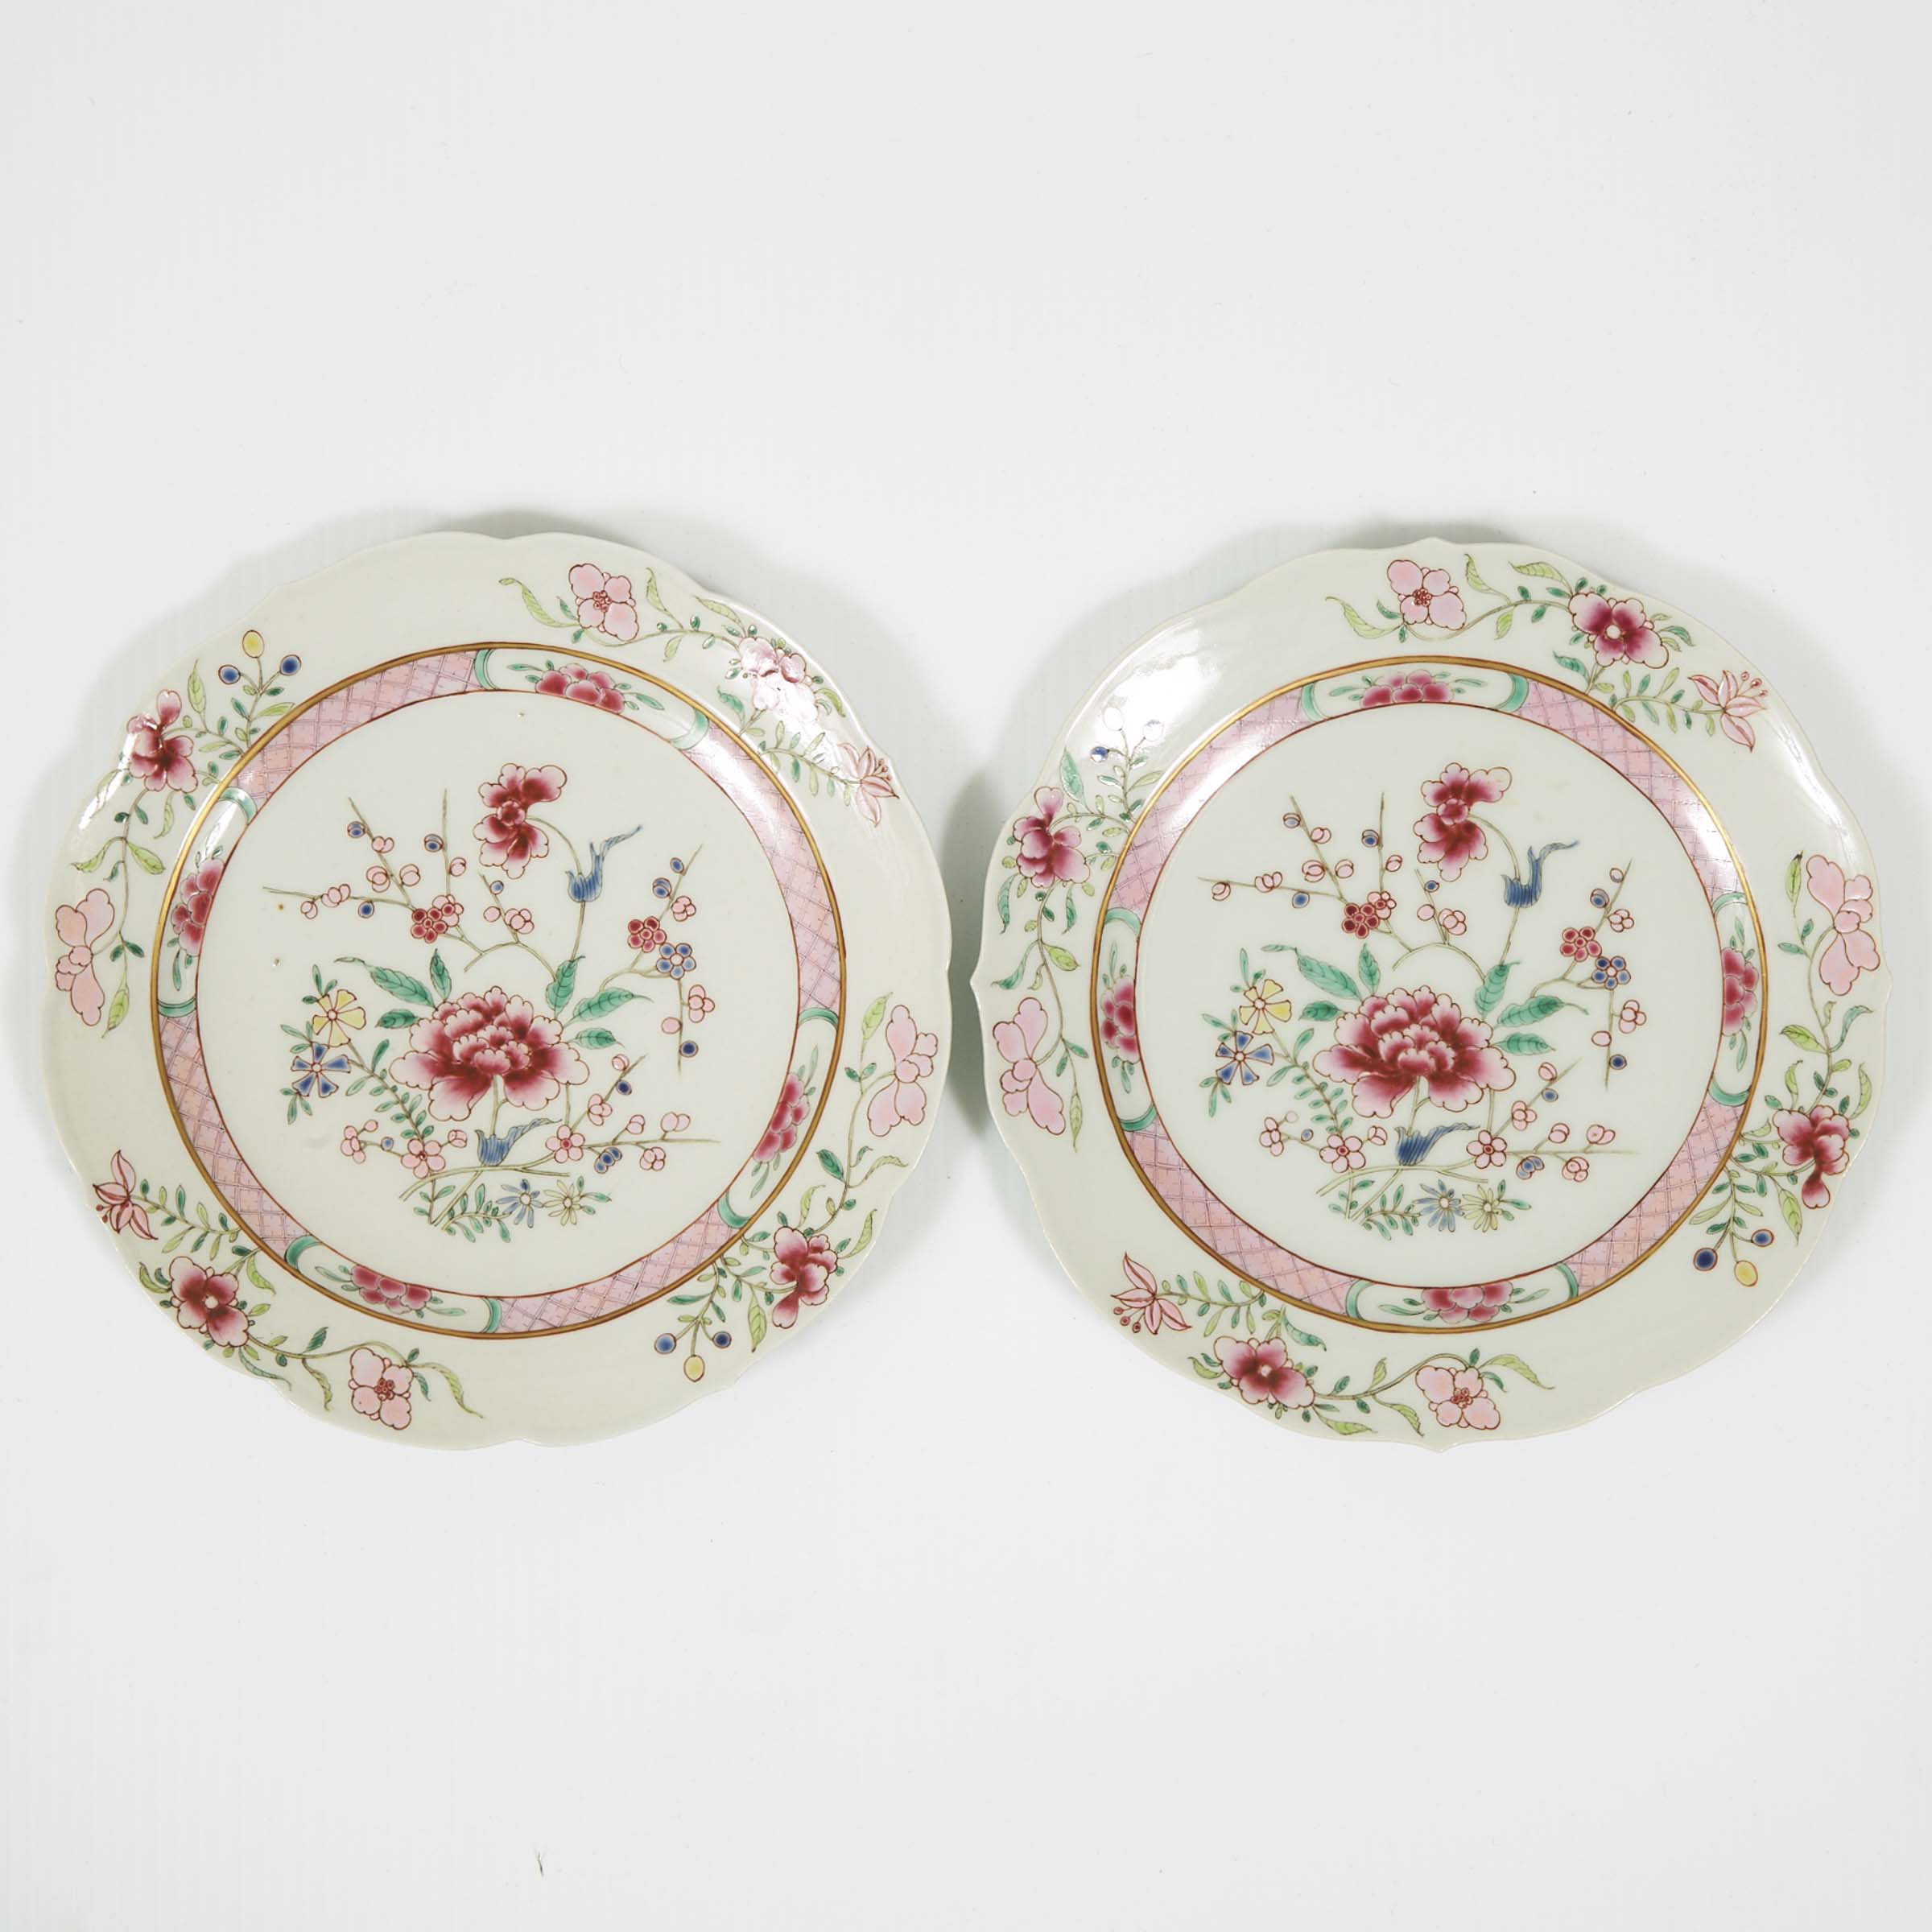 A Pair of Famille Rose Barbed-Rim Plates, 18th Century